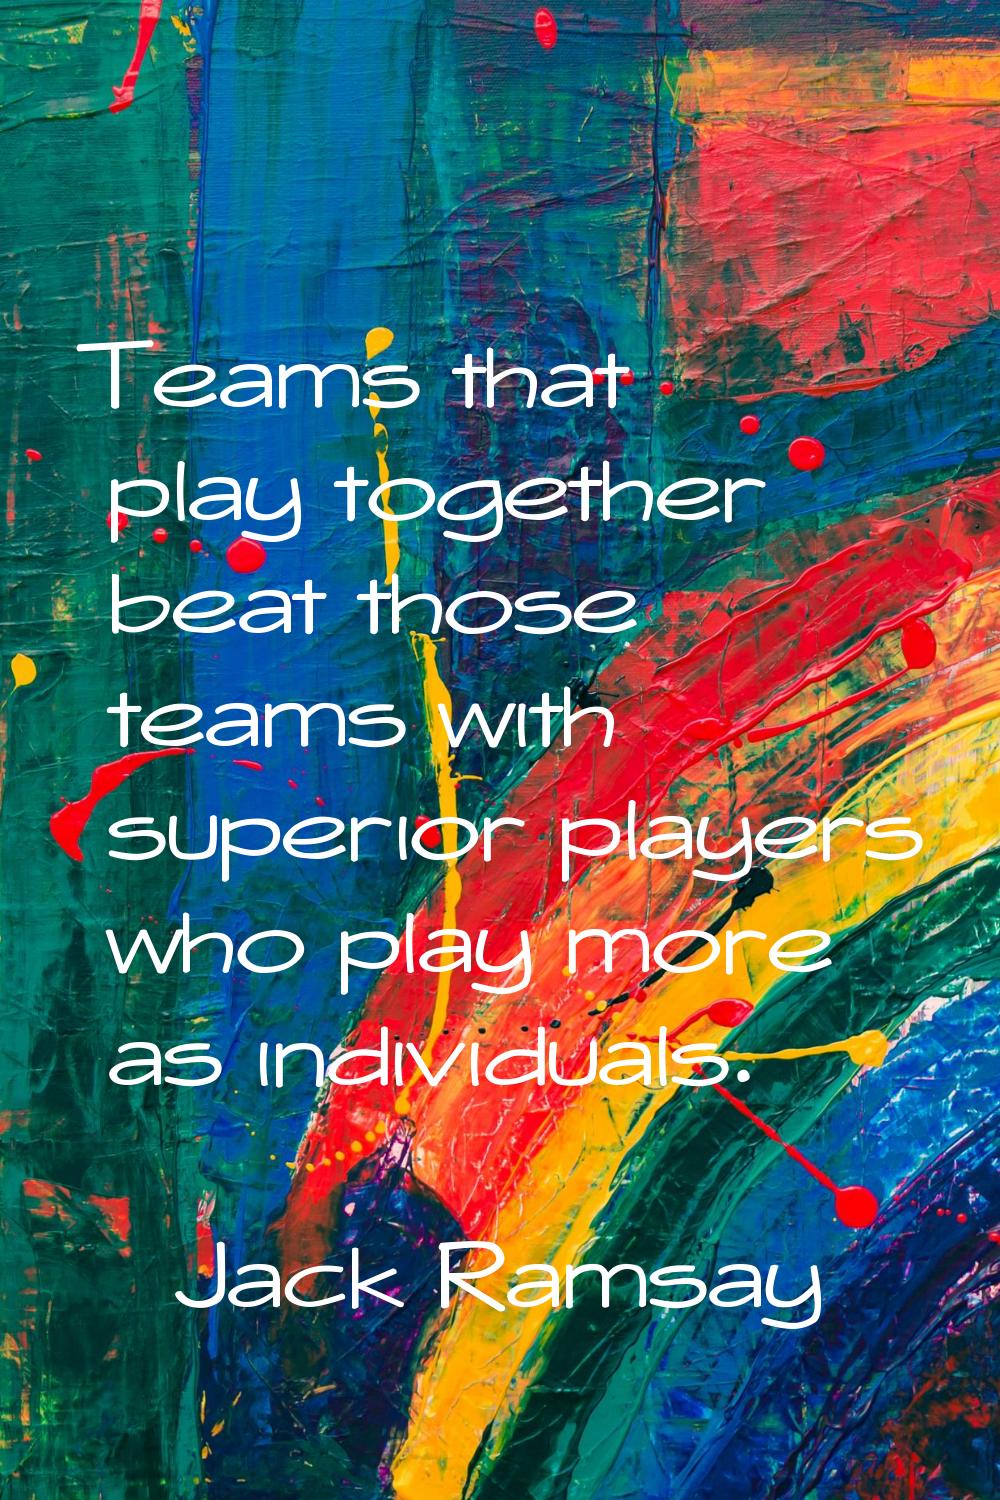 Teams that play together beat those teams with superior players who play more as individuals.